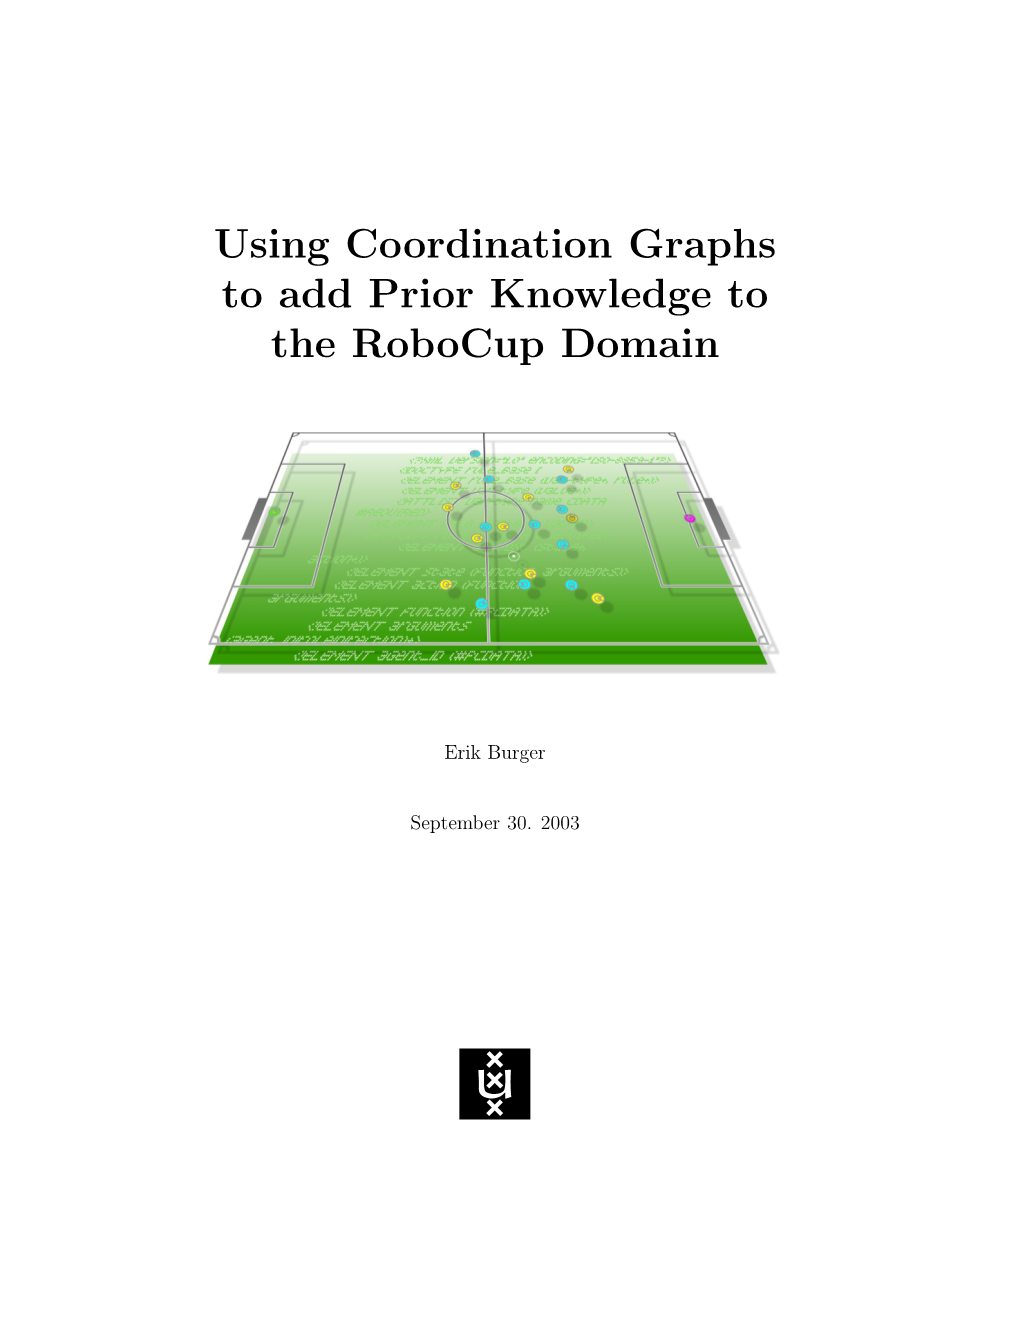 Using Coordination Graphs to Add Prior Knowledge to the Robocup Domain